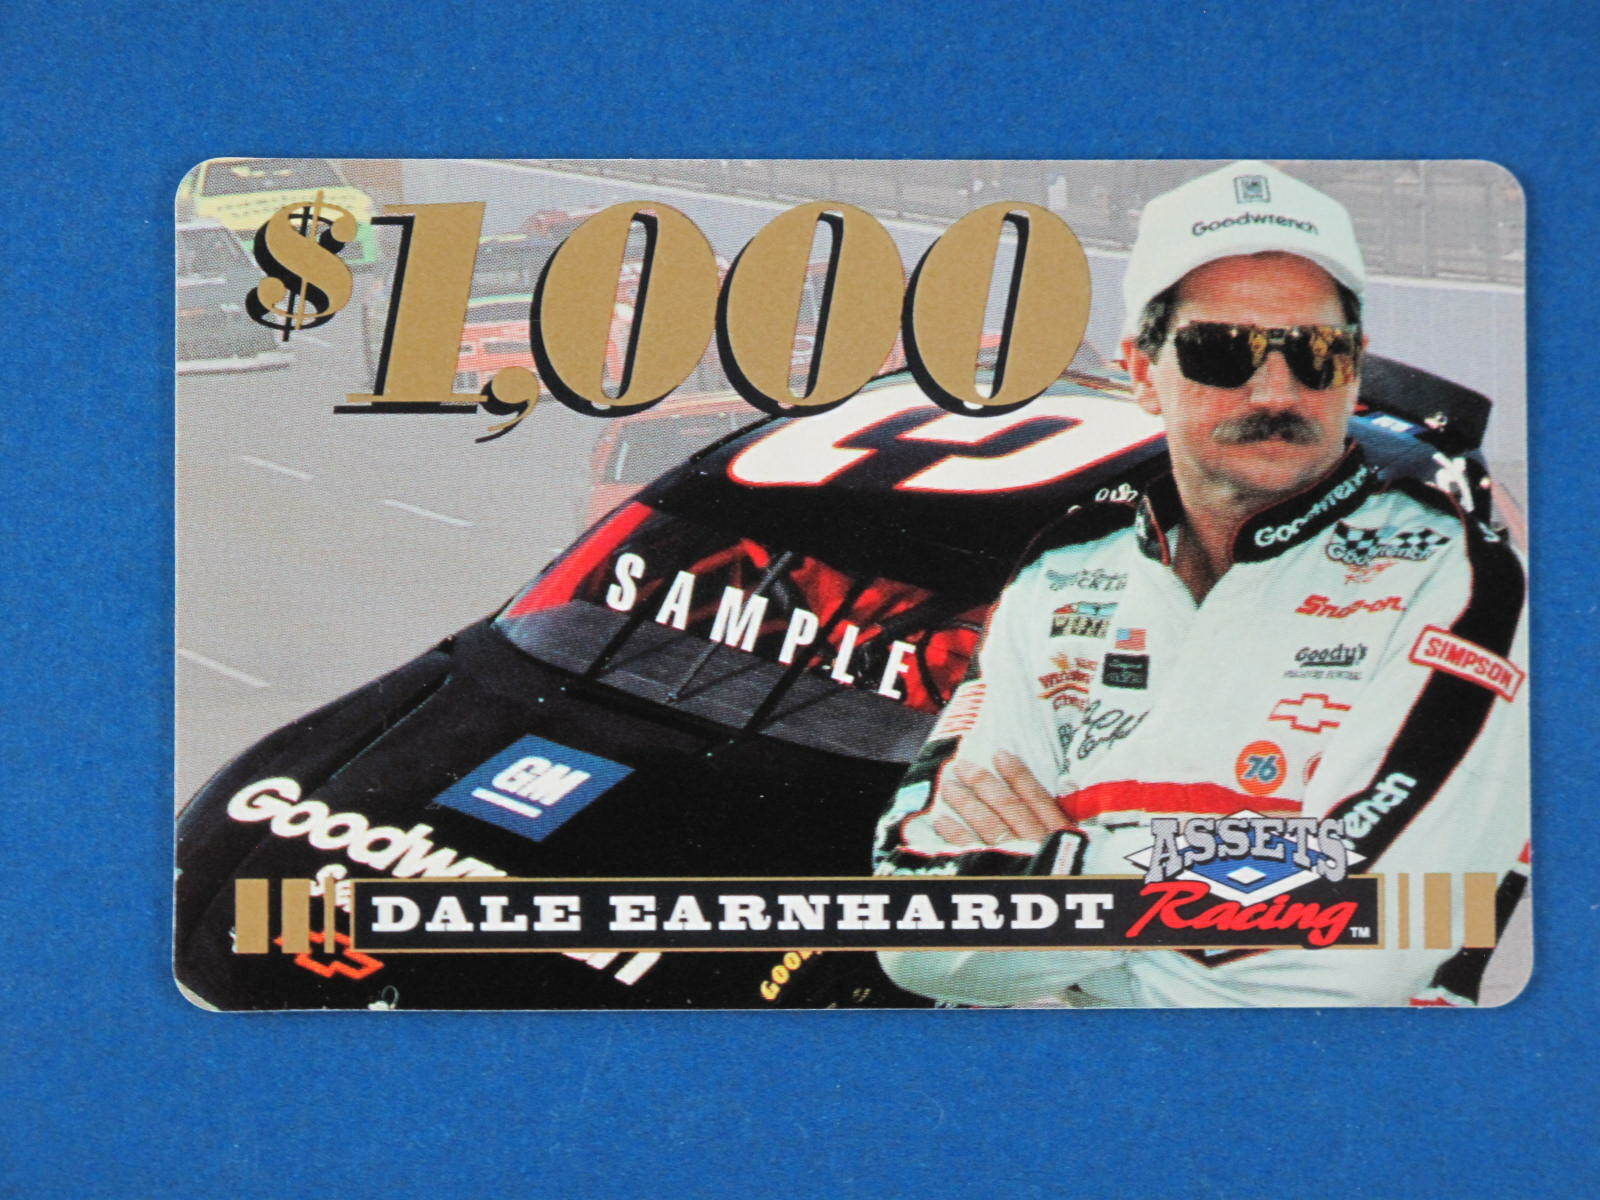 1995 Assets Racing $1000 Dale Earnhardt (Goodwrench) Sample Phone Card